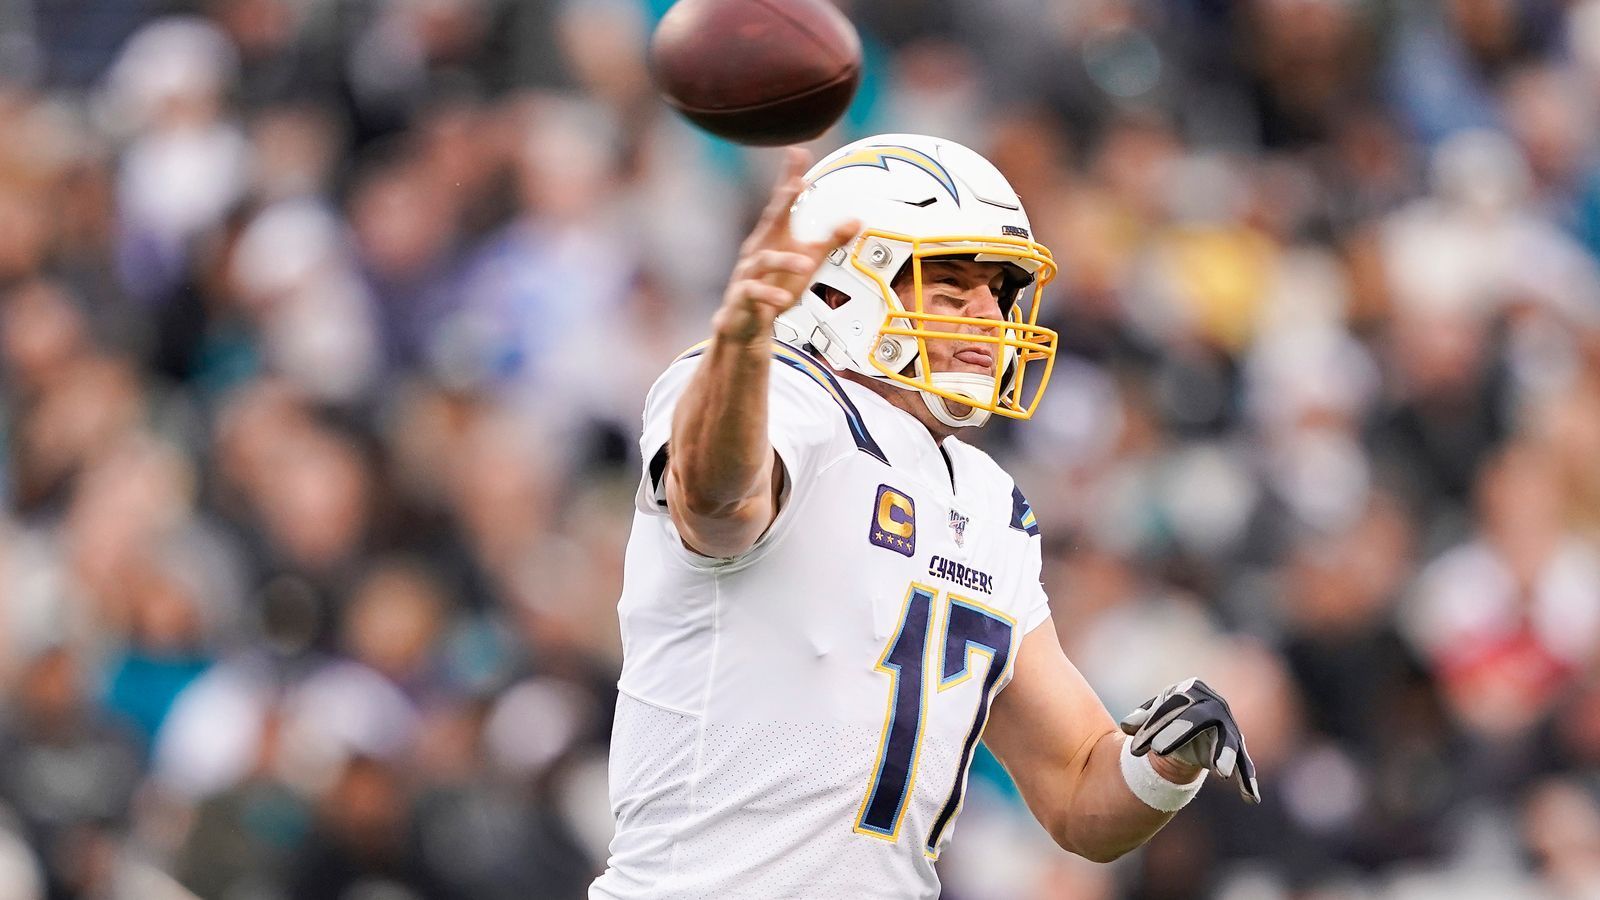 
                <strong>Los Angeles Chargers</strong><br>
                Ausgeschieden nach Woche 14AFC West:1. Kansas City Chiefs (9-4)2. Oakland Raiders (6-7)3. Denver Broncos (5-8)4. Los Angeles Chargers (5-8)
              